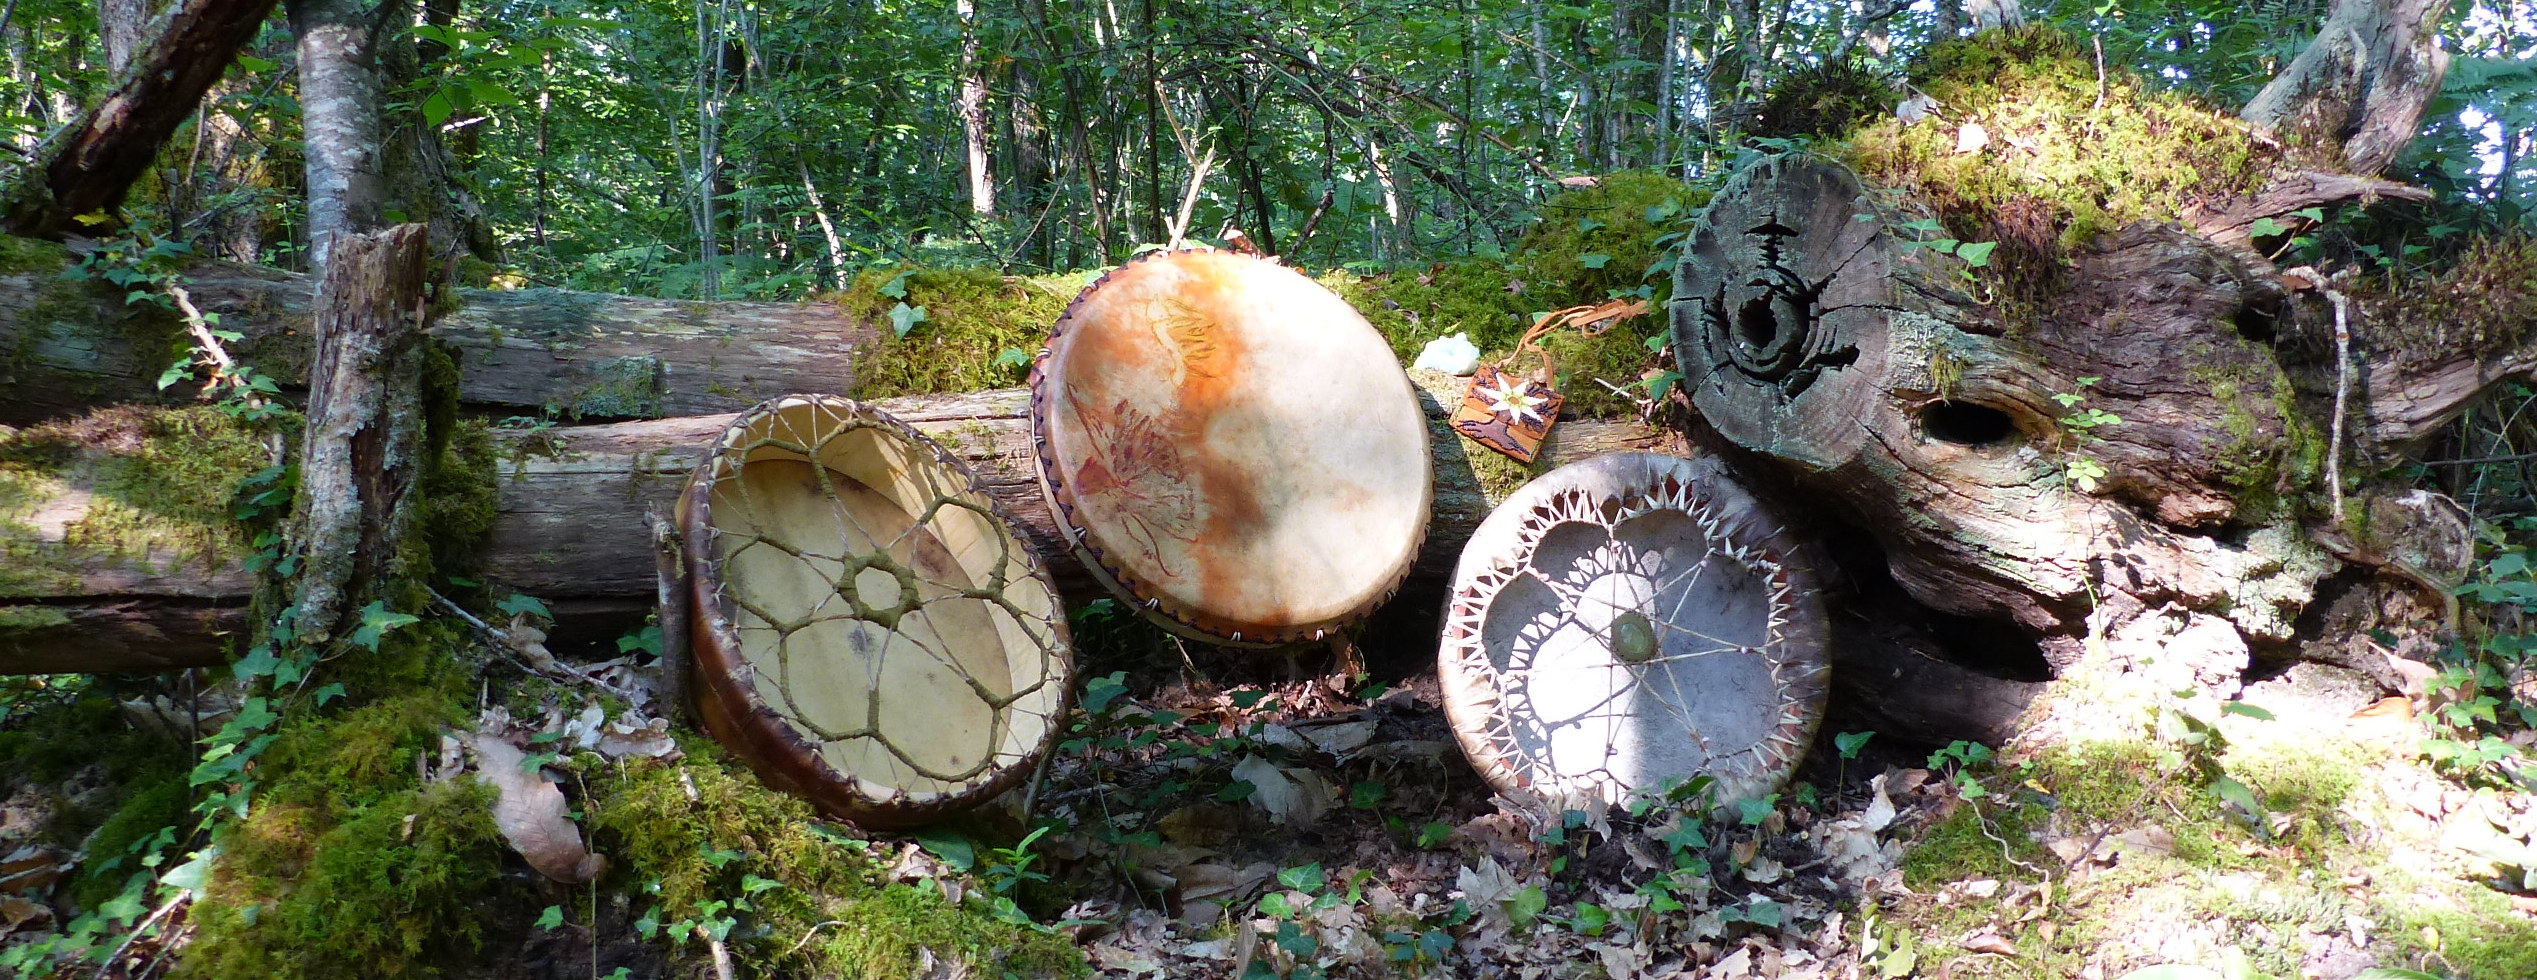 shamanic drums for meditation and connecting with nature